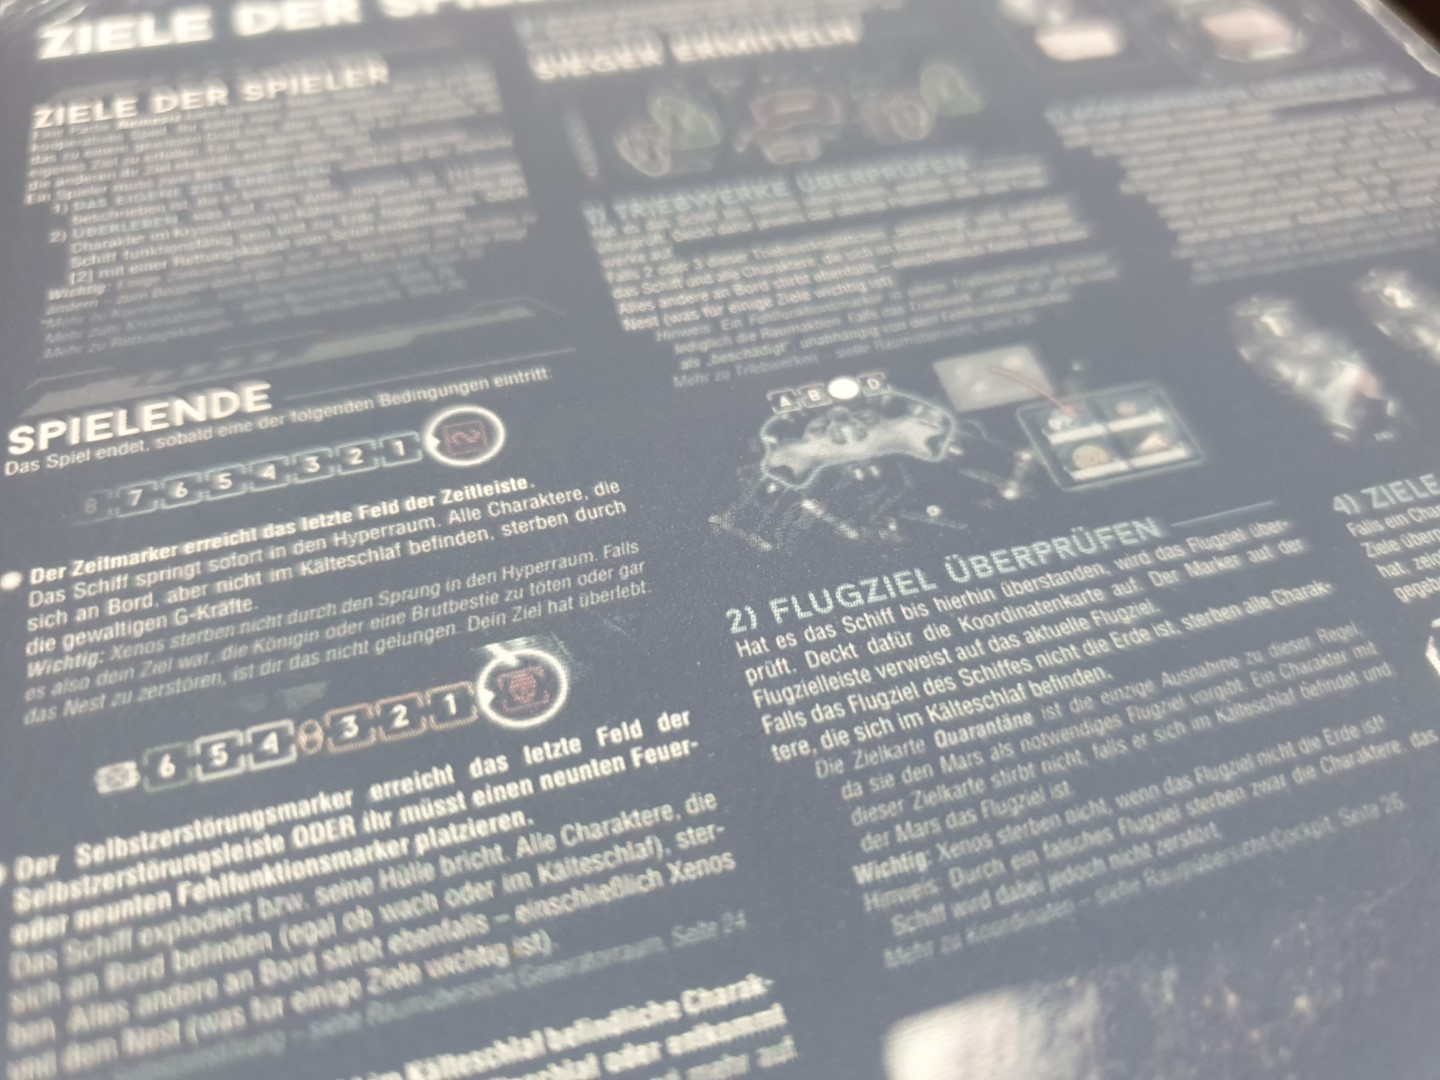 Detail view of the boardgame rules on the Nova.